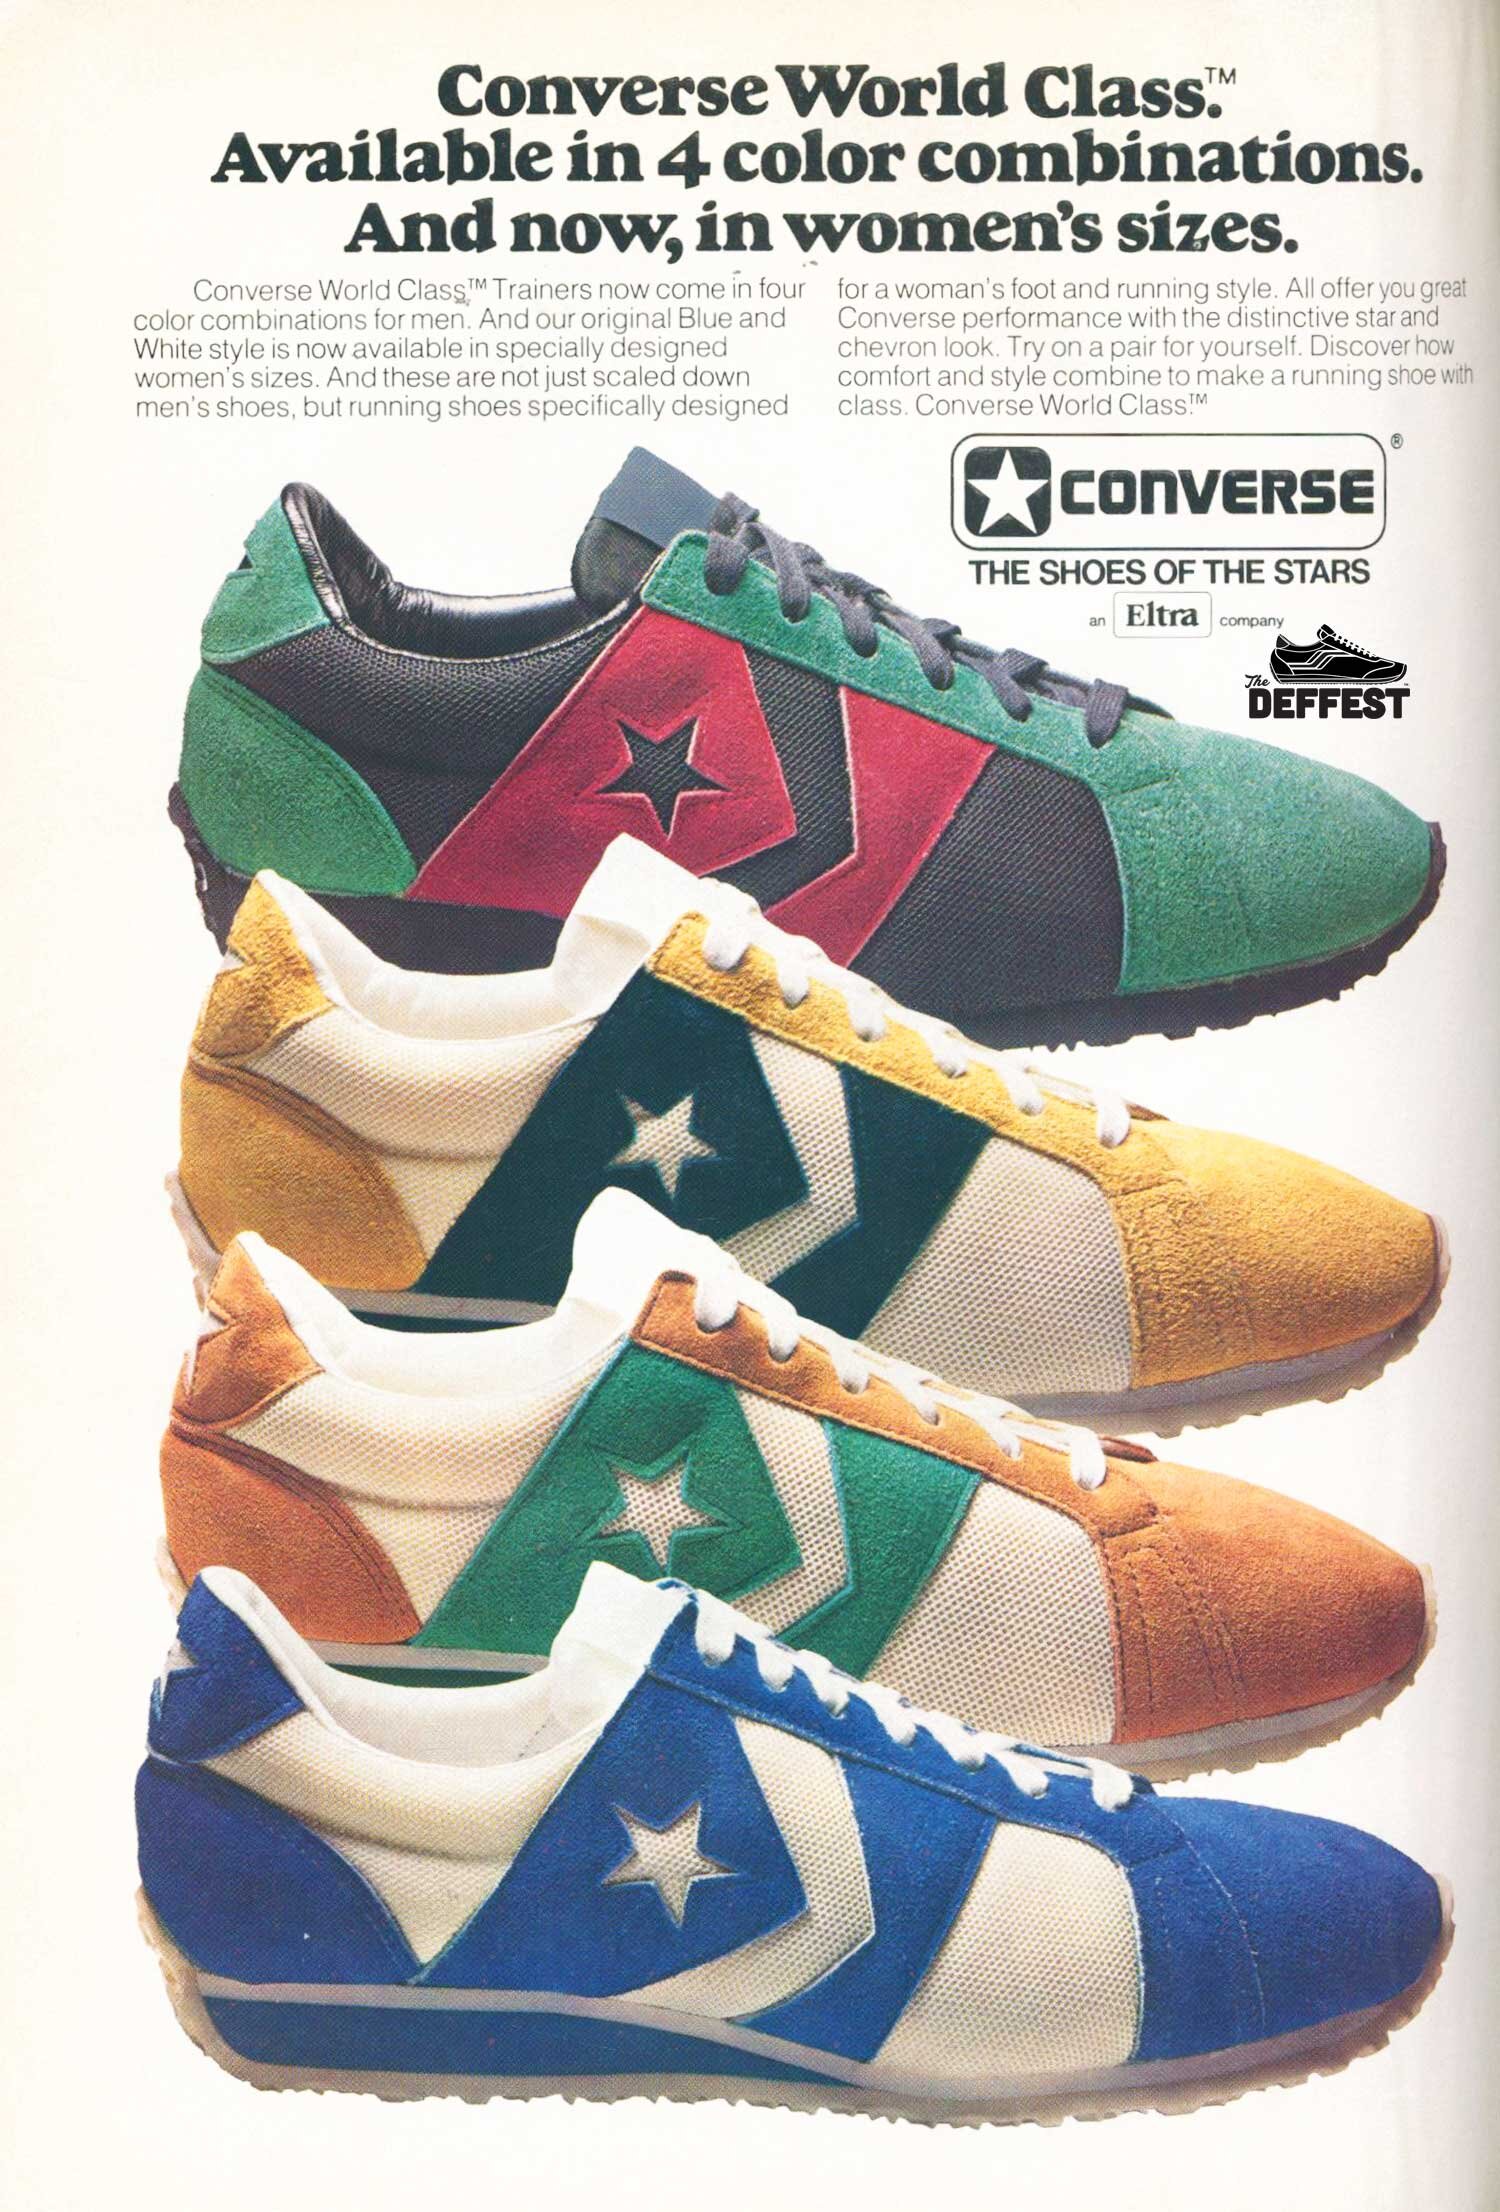 vintage Converse sneakers — The Deffest®. A vintage and retro sneaker blog.  — Vintage Ads